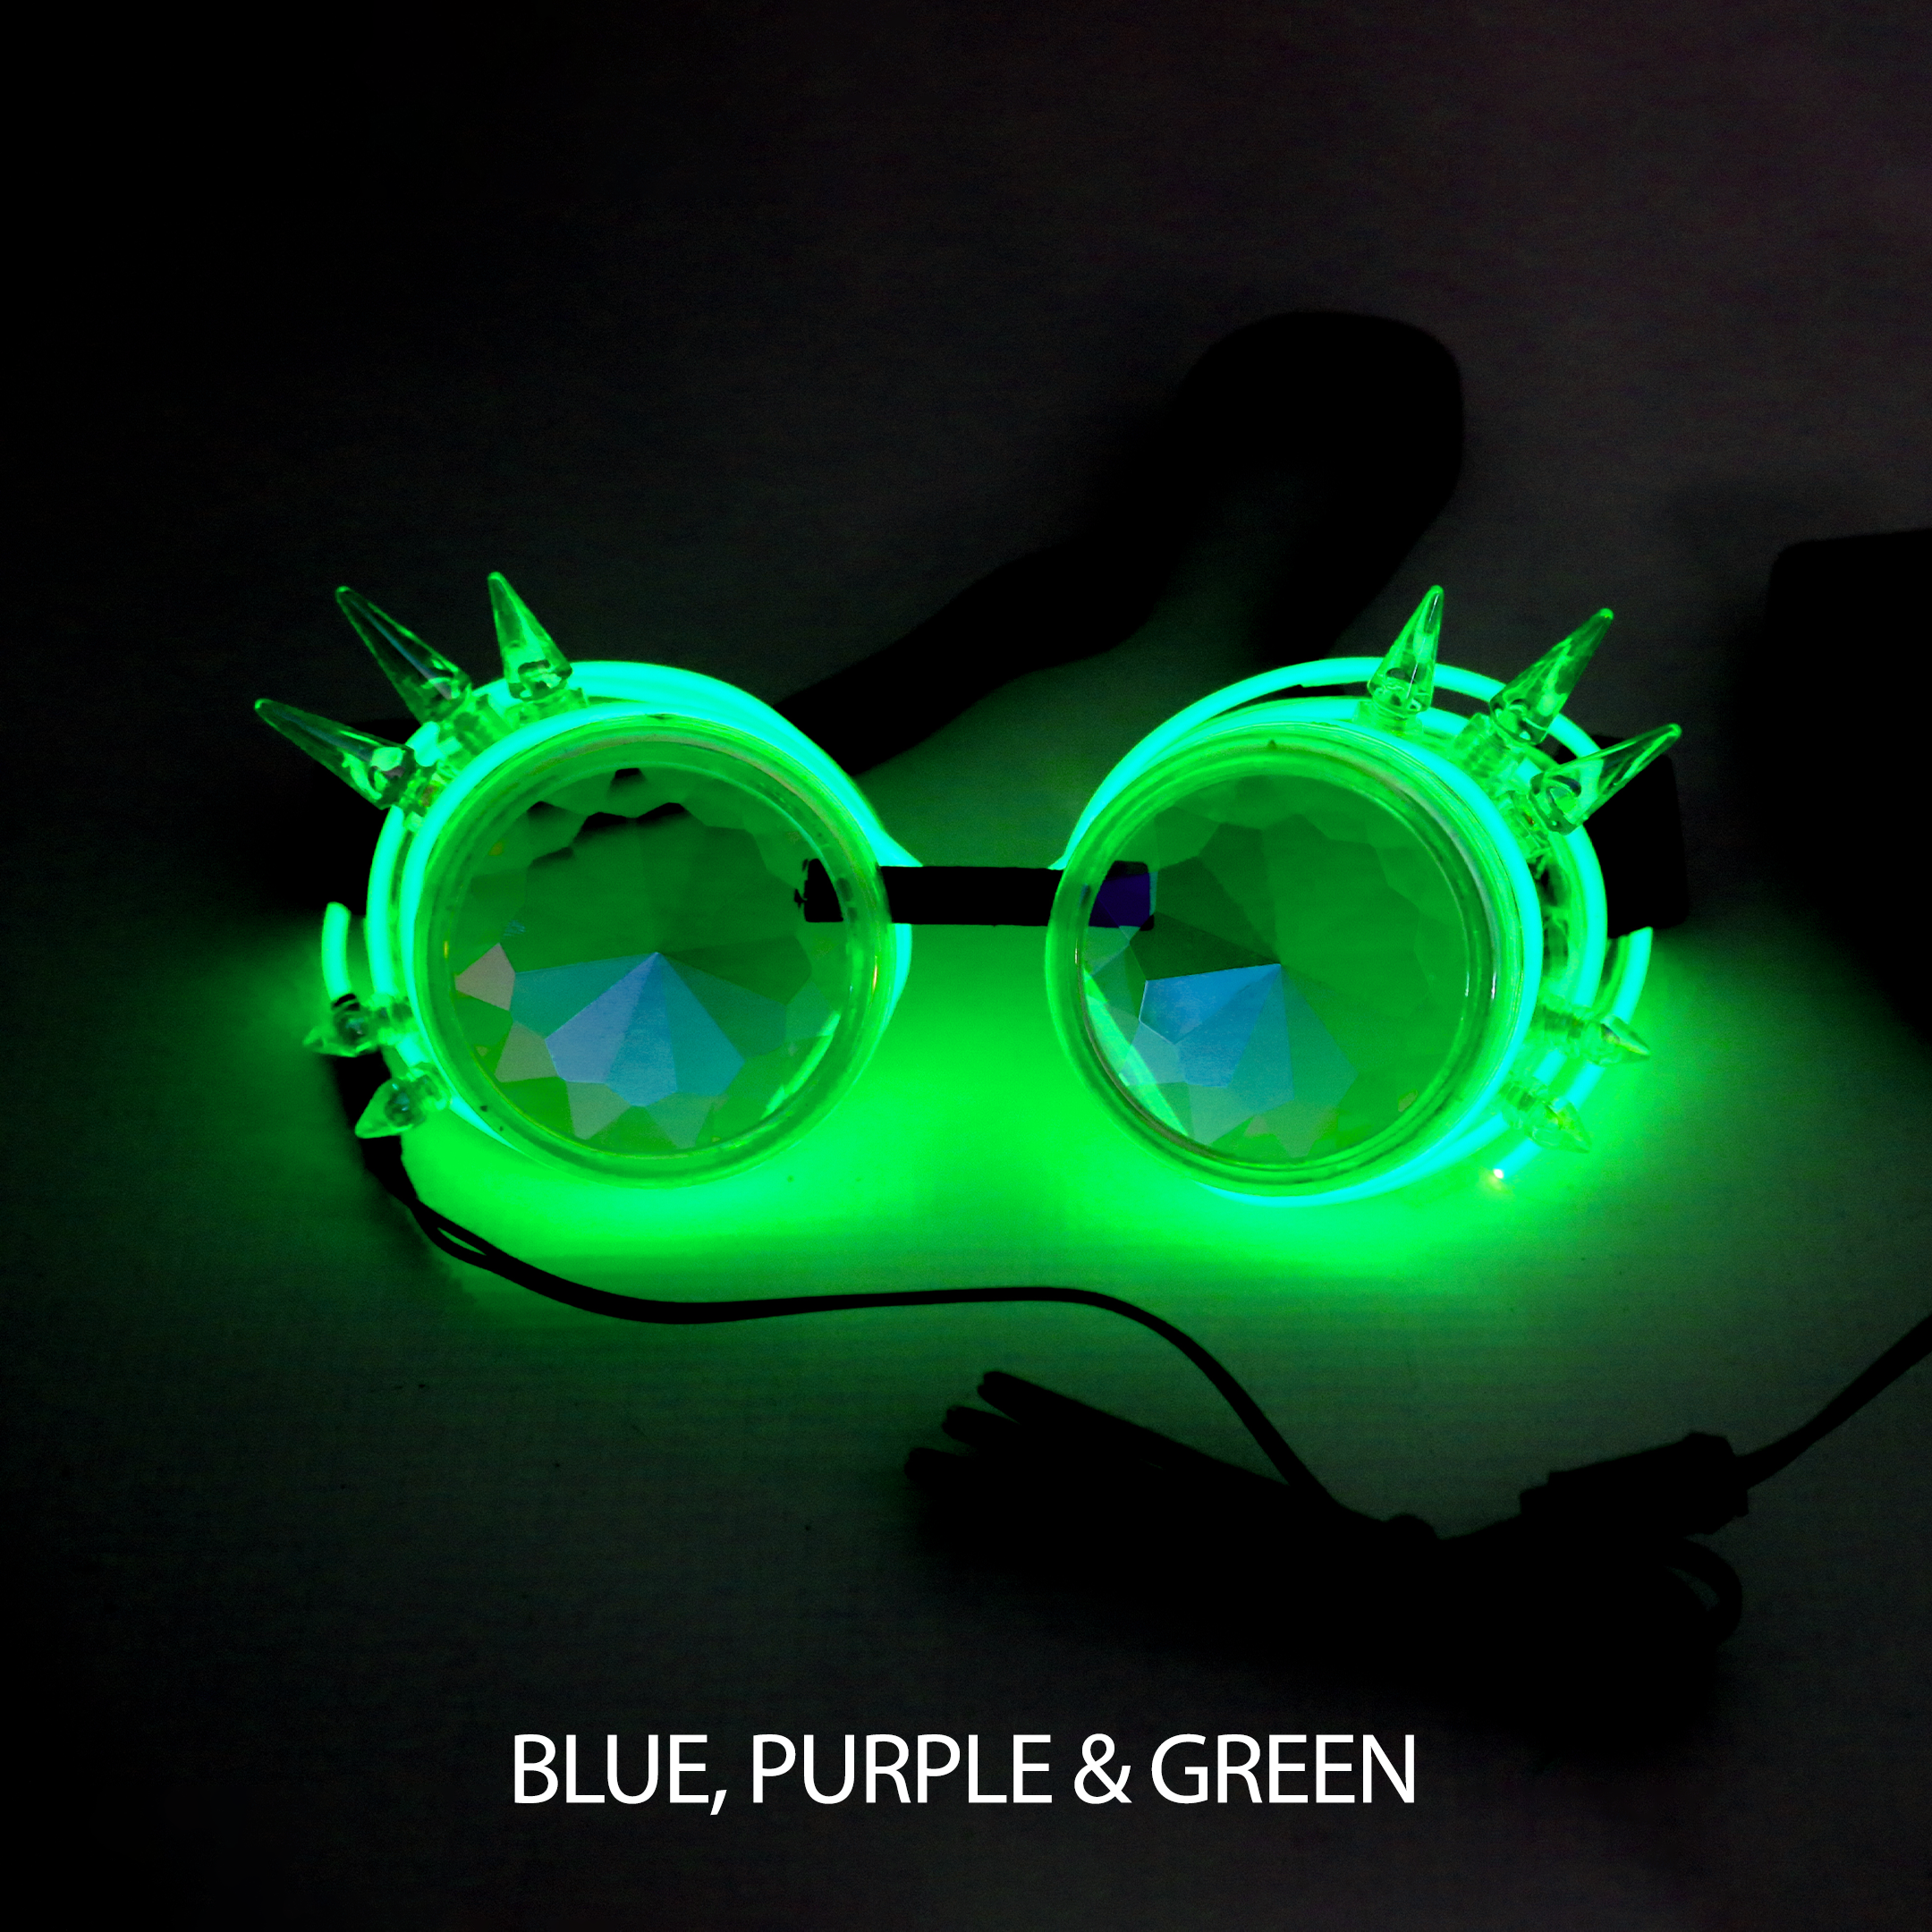 Green LED steampunk Kaleidoscope glasses Electro Glow | South Africa's Best LED Festival Gear & Rave Clothes - festivals outfits, clothes festival, festival clothing south africa, festival ideas outfits, festival outfits rave, festival wear, steam punk goggle, rave glasses, outfit for a rave, kaleidoscope glasses, diffraction glasses, clothes for a rave, rave sunglasses, spectral glasses, rave goggles, clothes for a rave, rave clothing south africa, festival wear south africa, accessories festival